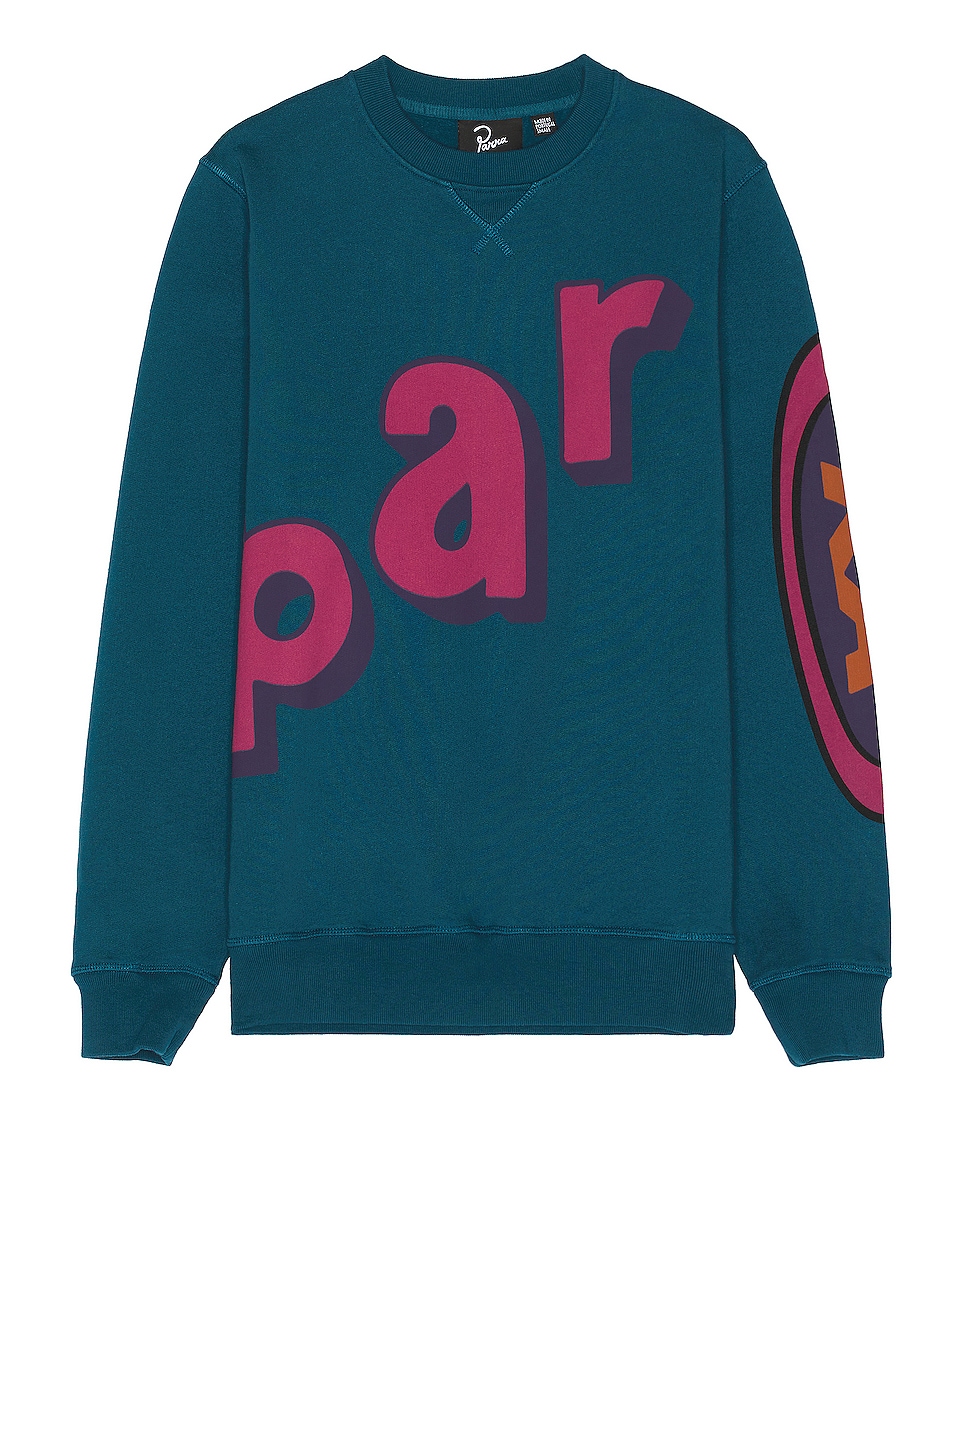 Image 1 of By Parra Loudness Crewneck in Coral Blue